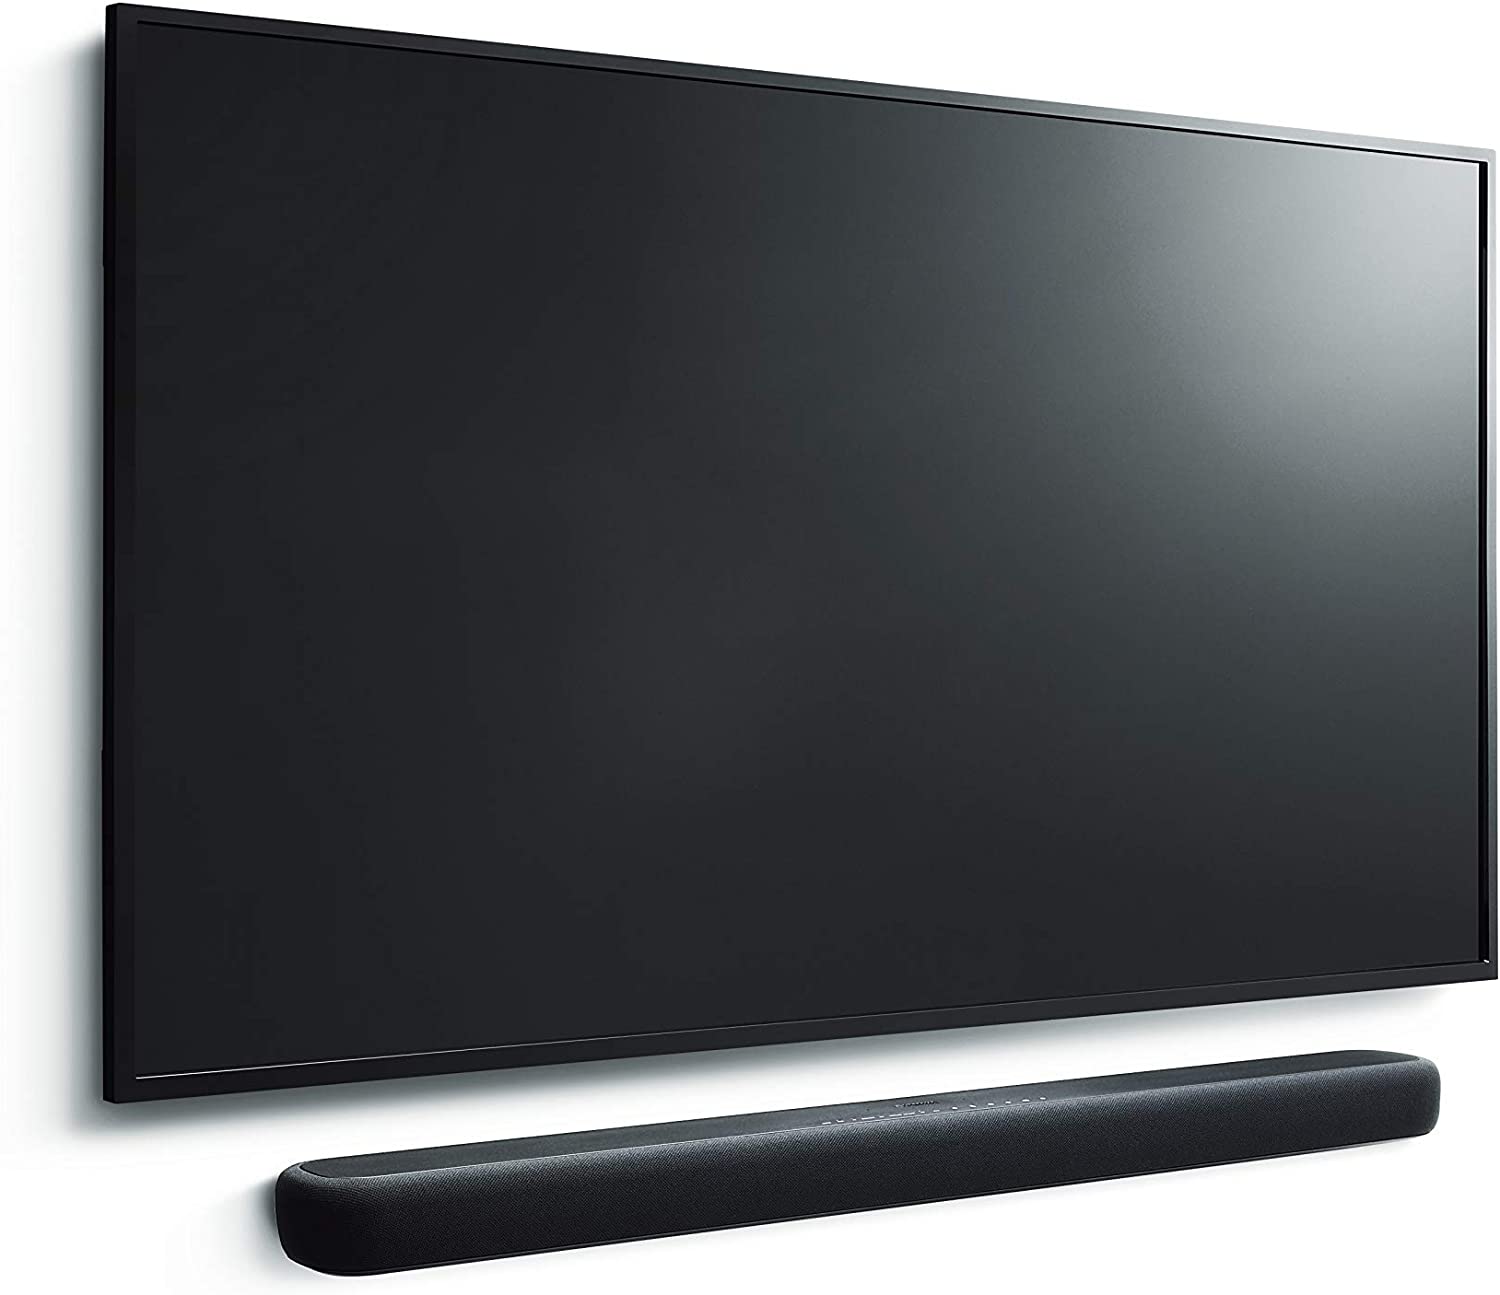 The Best Soundbars for Every Budget